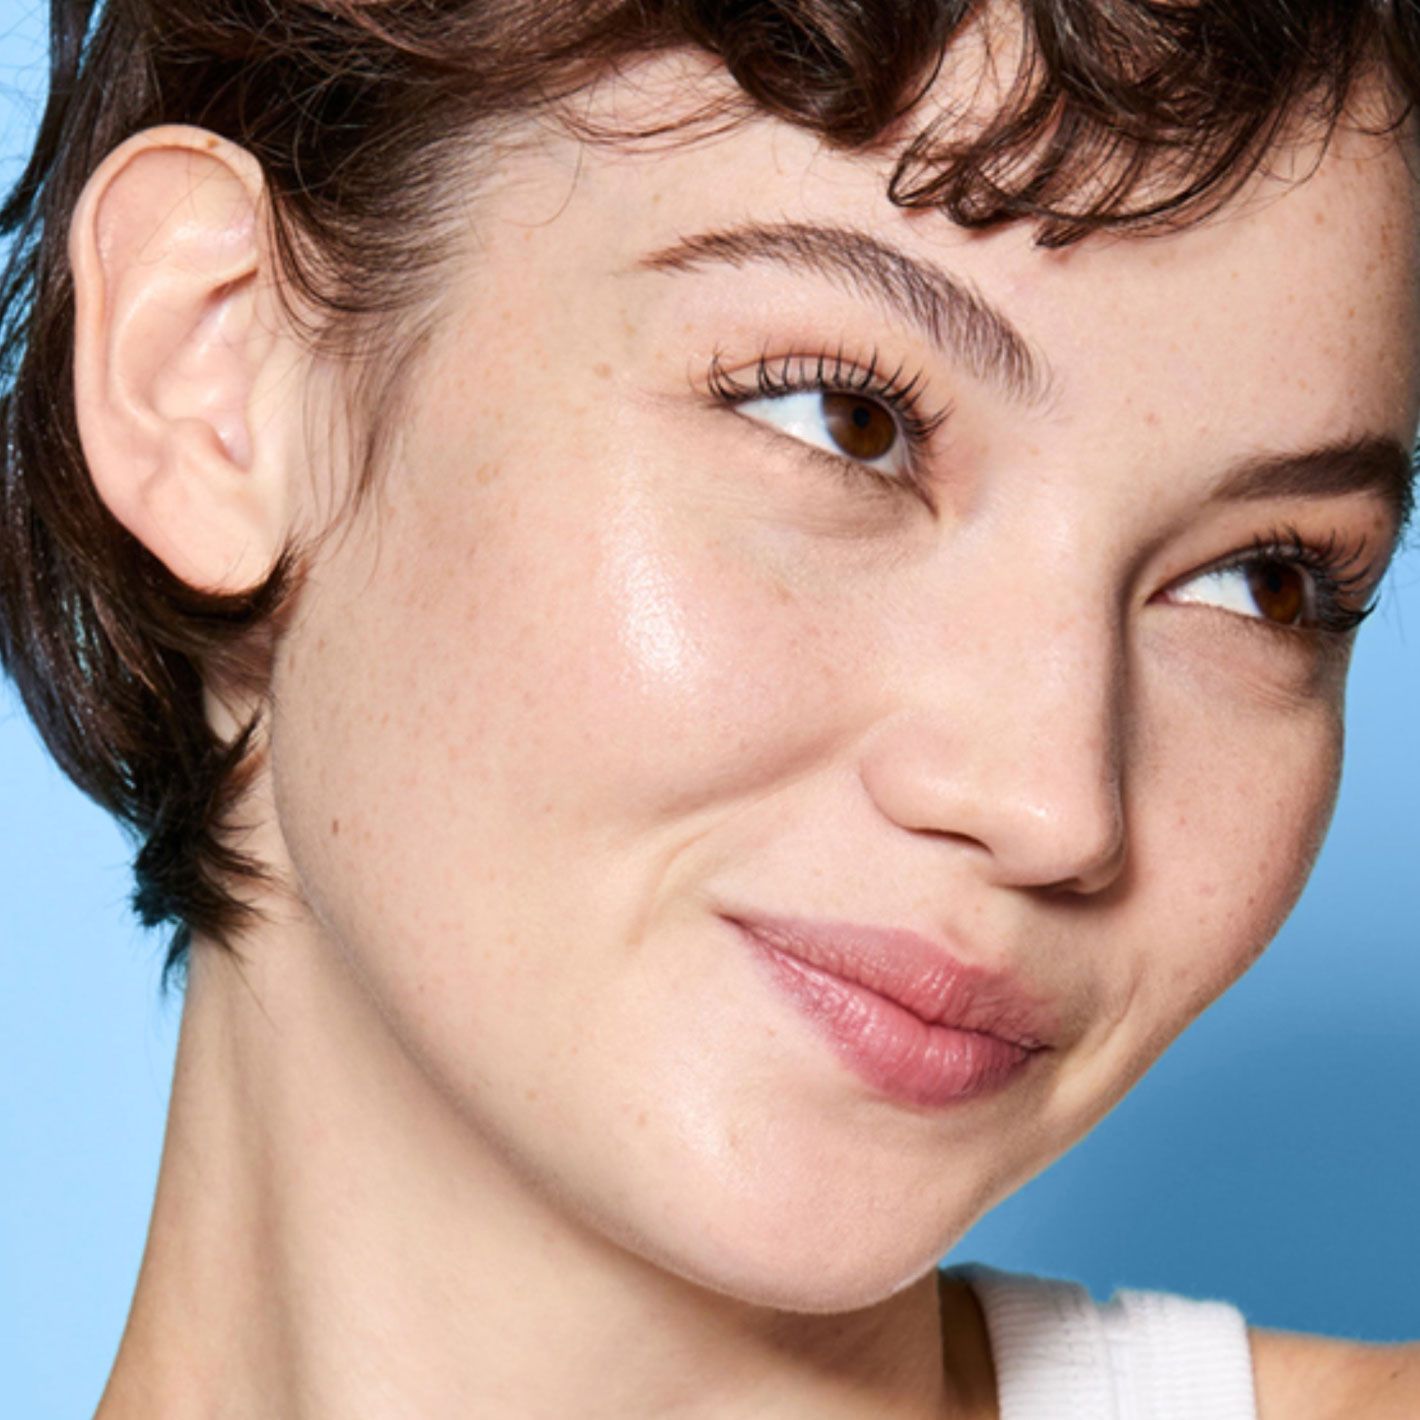 A model is happy showing smooth skin on blue background for belif skincare.